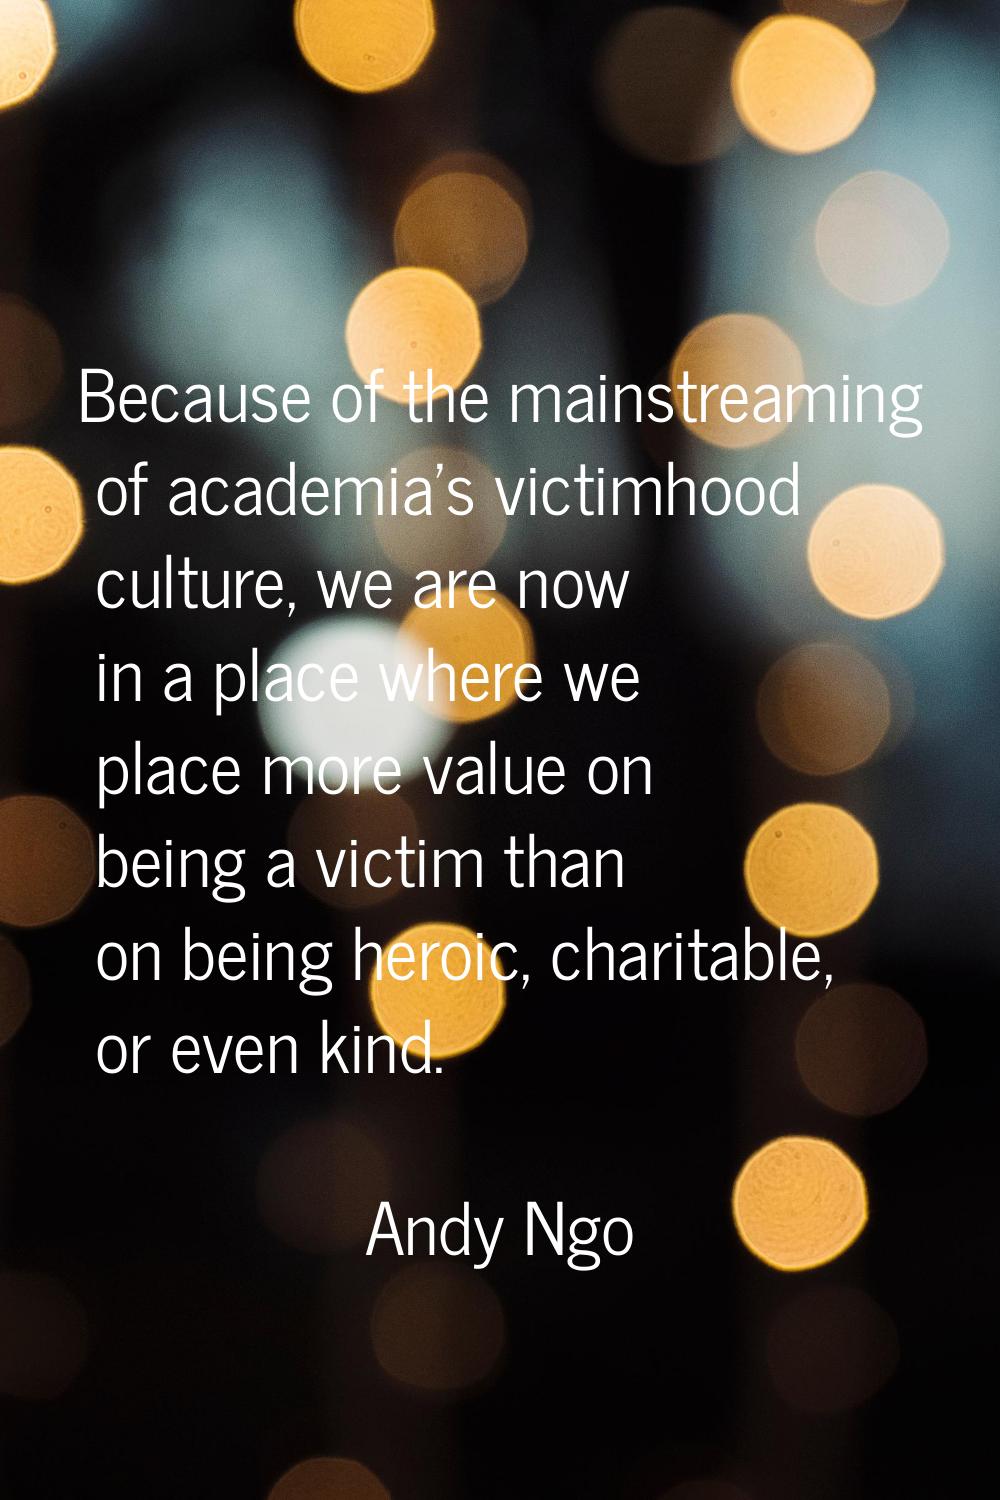 Because of the mainstreaming of academia's victimhood culture, we are now in a place where we place